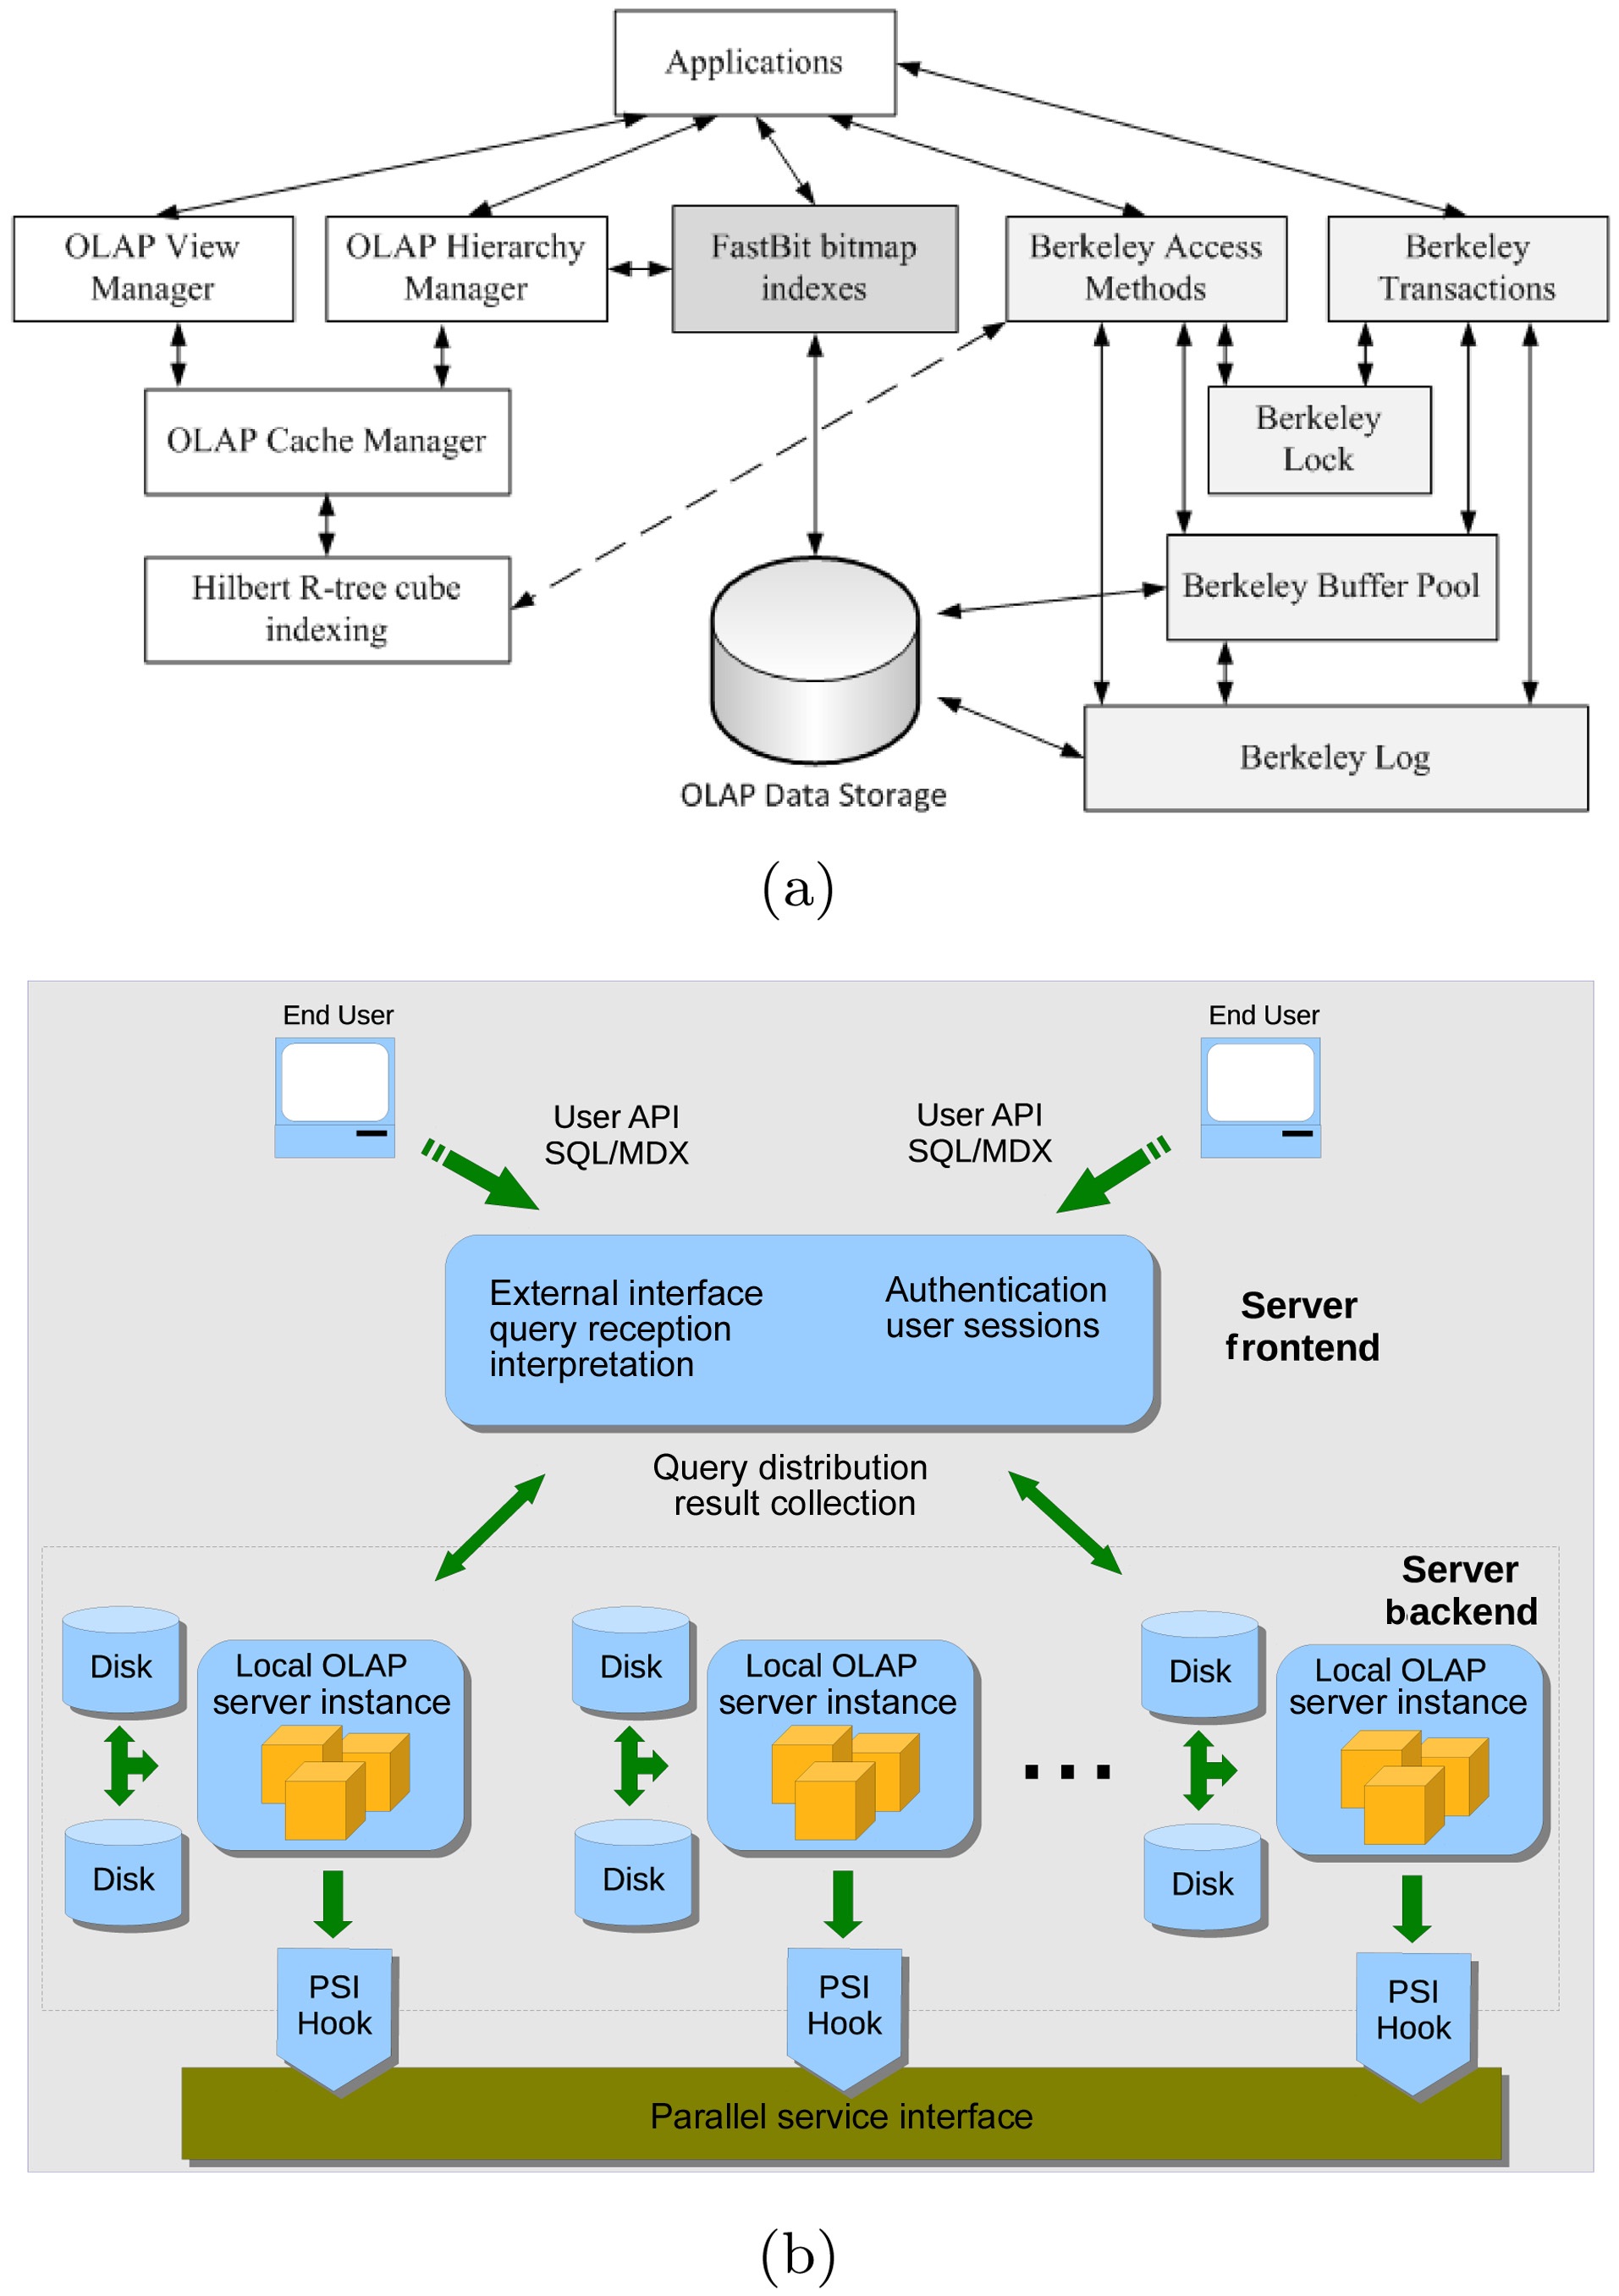 (a) Single node architecture, (b) the parallel database management system. OLAP: online analytical processing, API: application programming interface, PSI: parallel service interface.